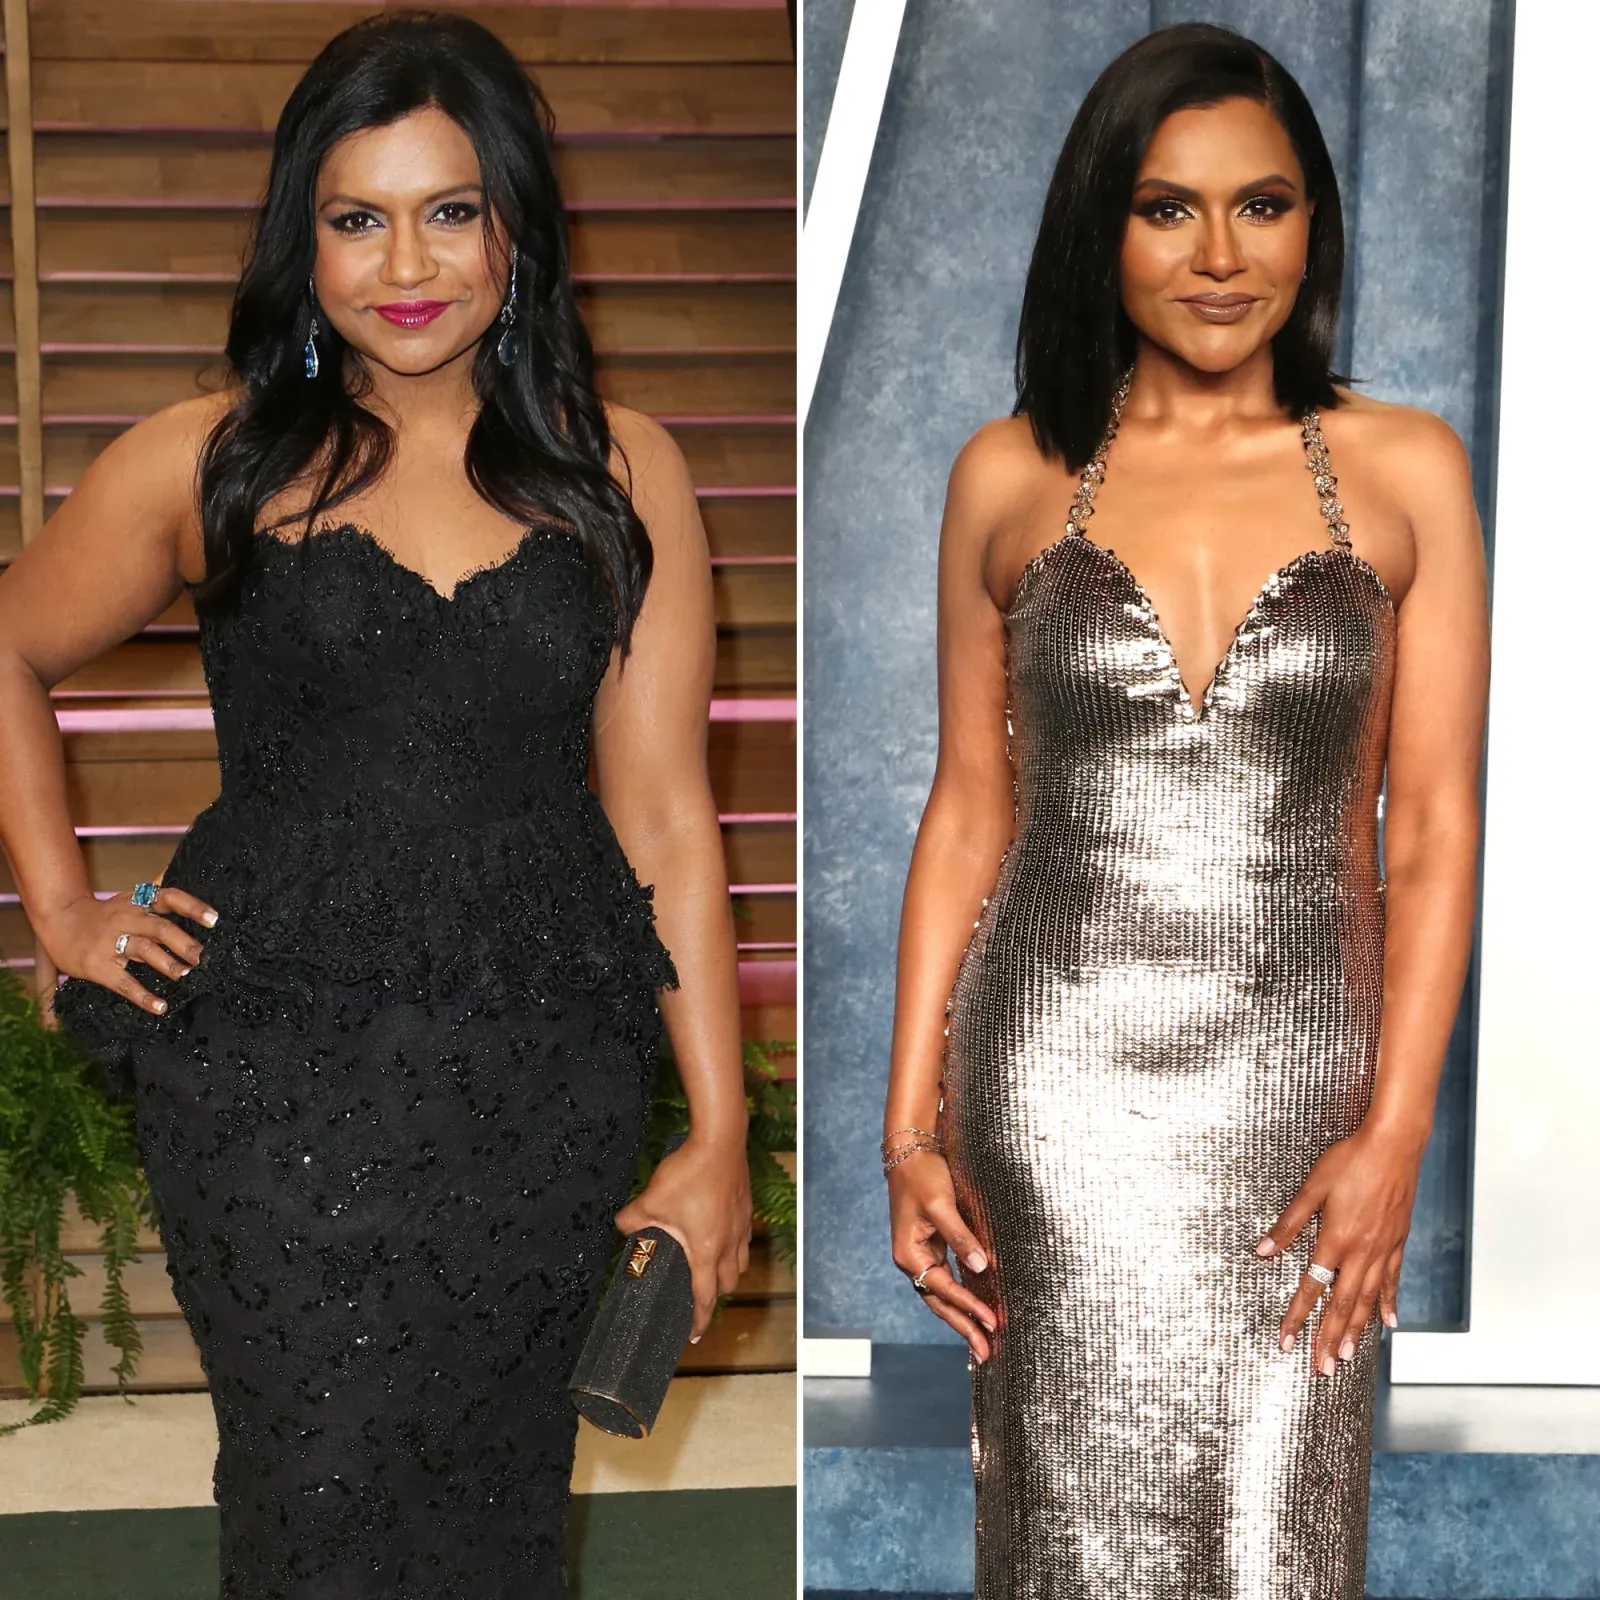 Mindy Kaling and her recent transformation